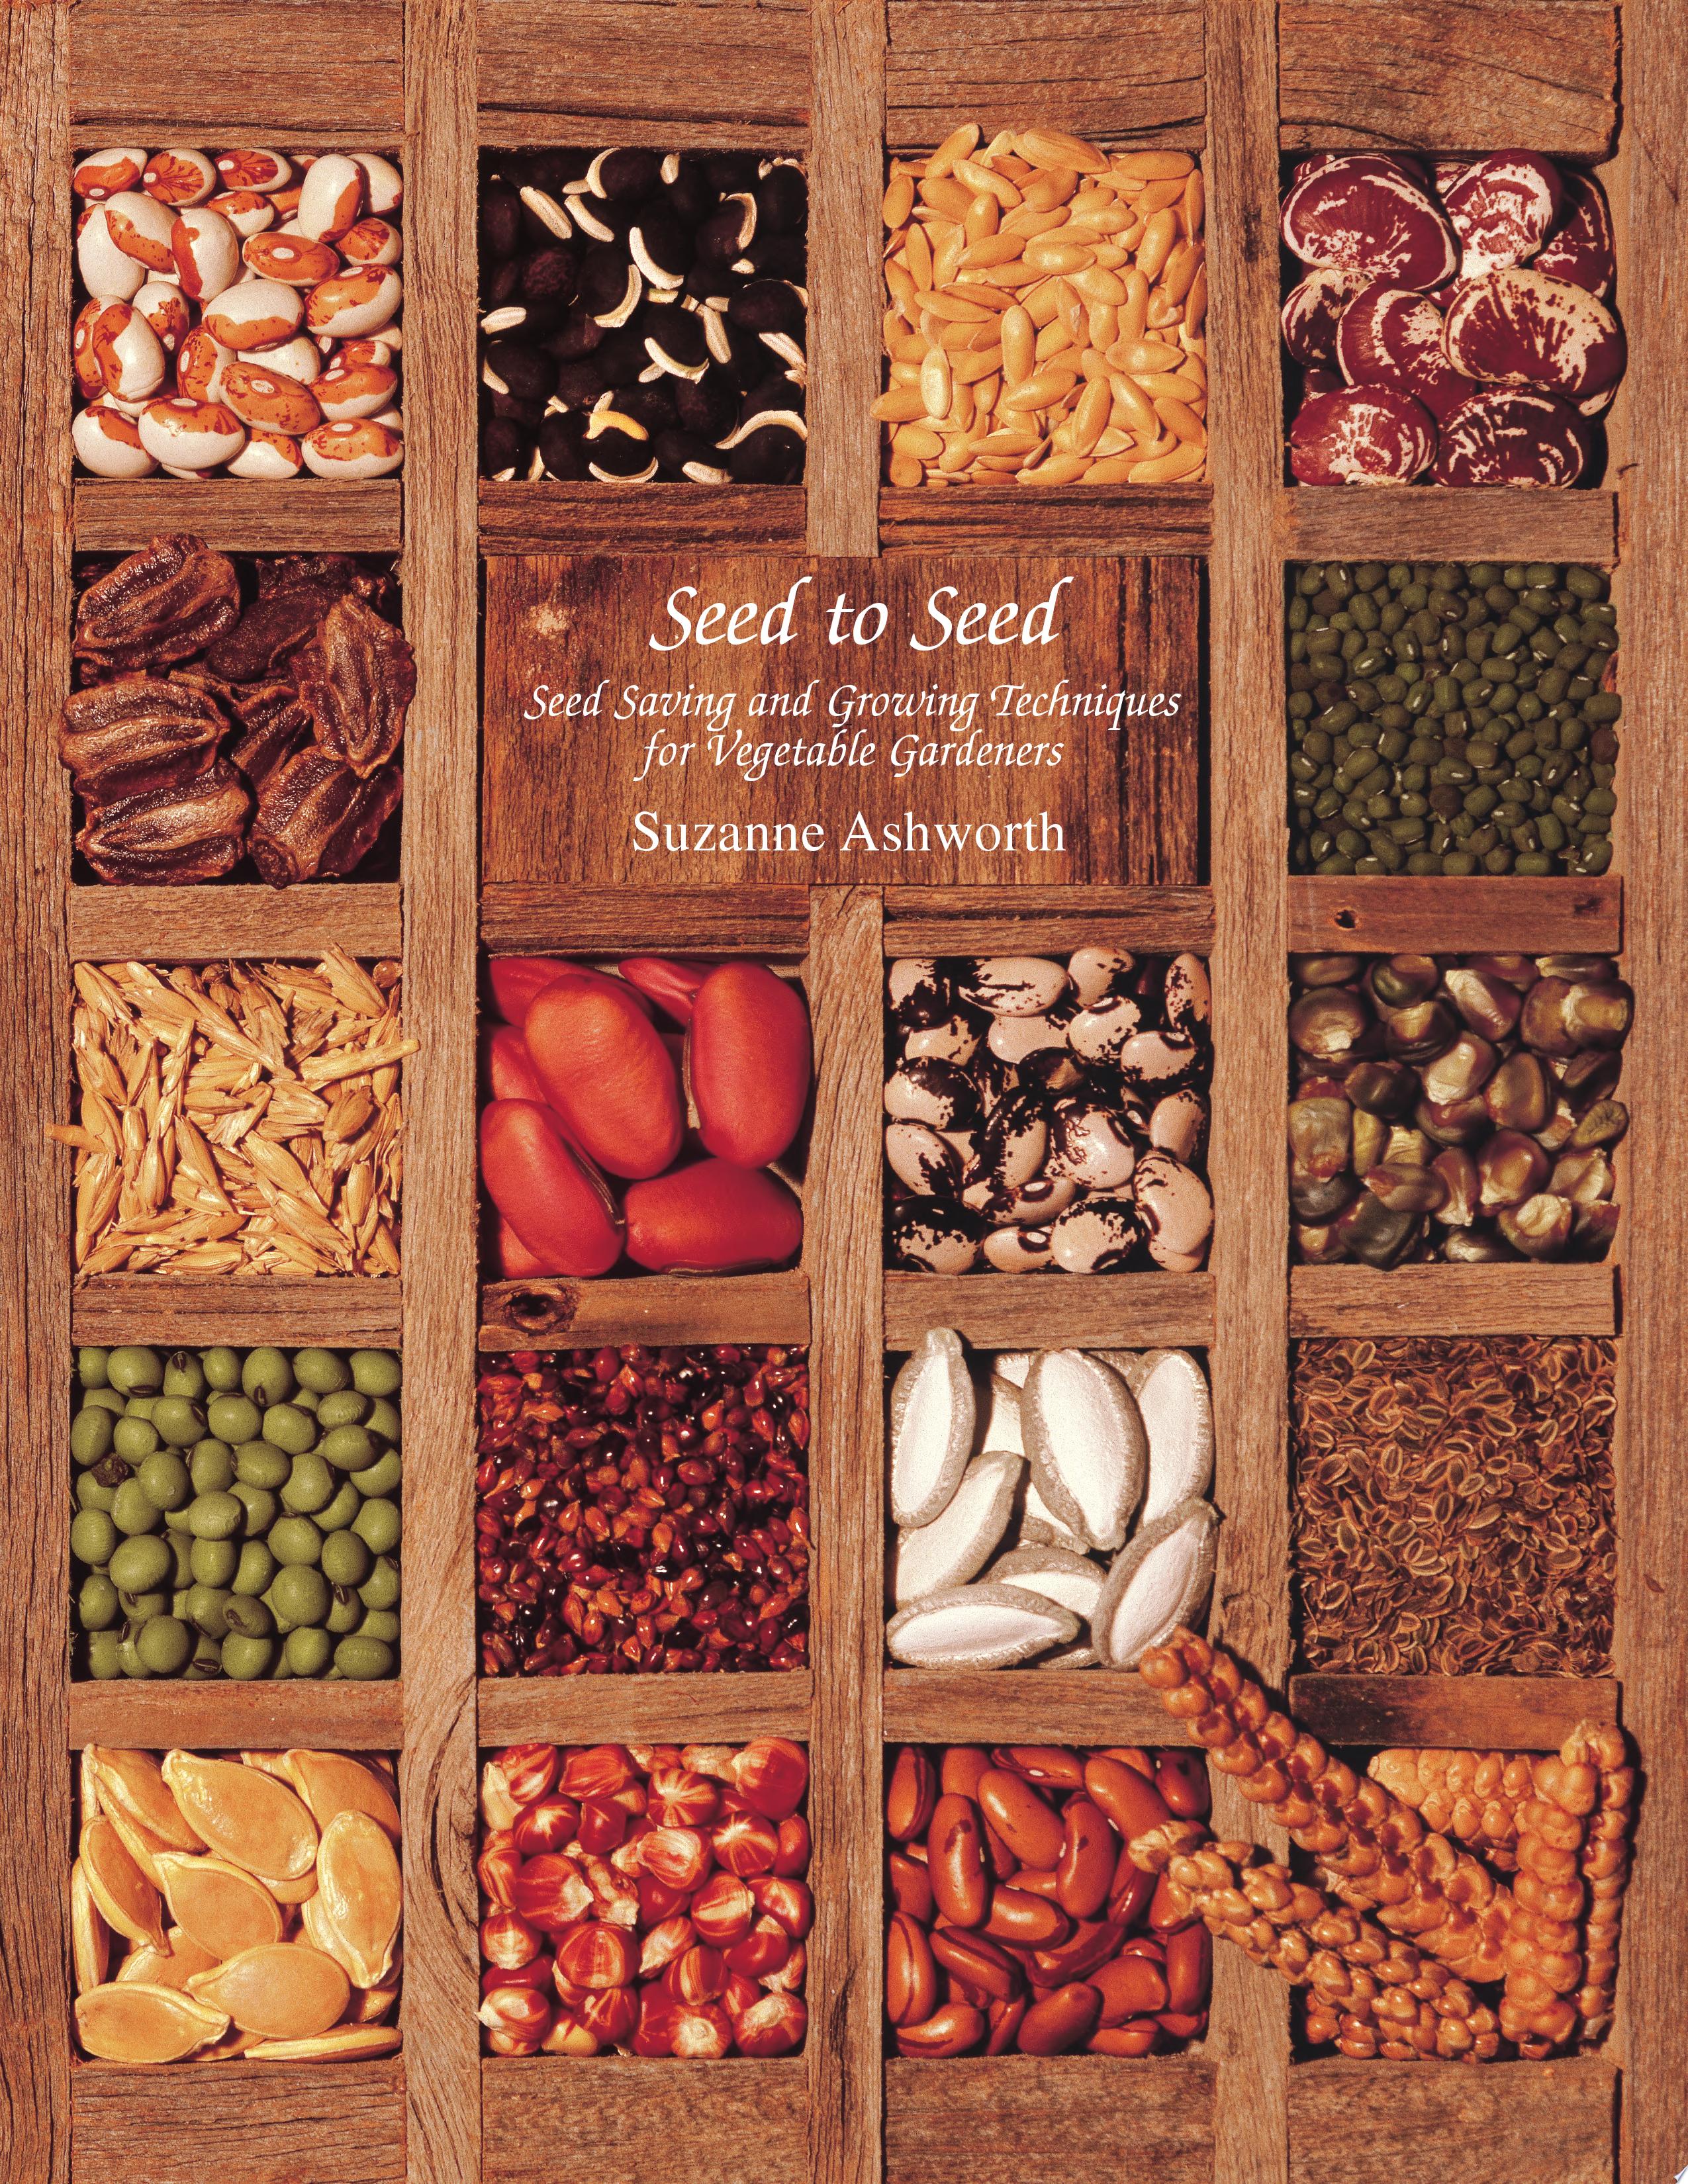 Image for "Seed to Seed"